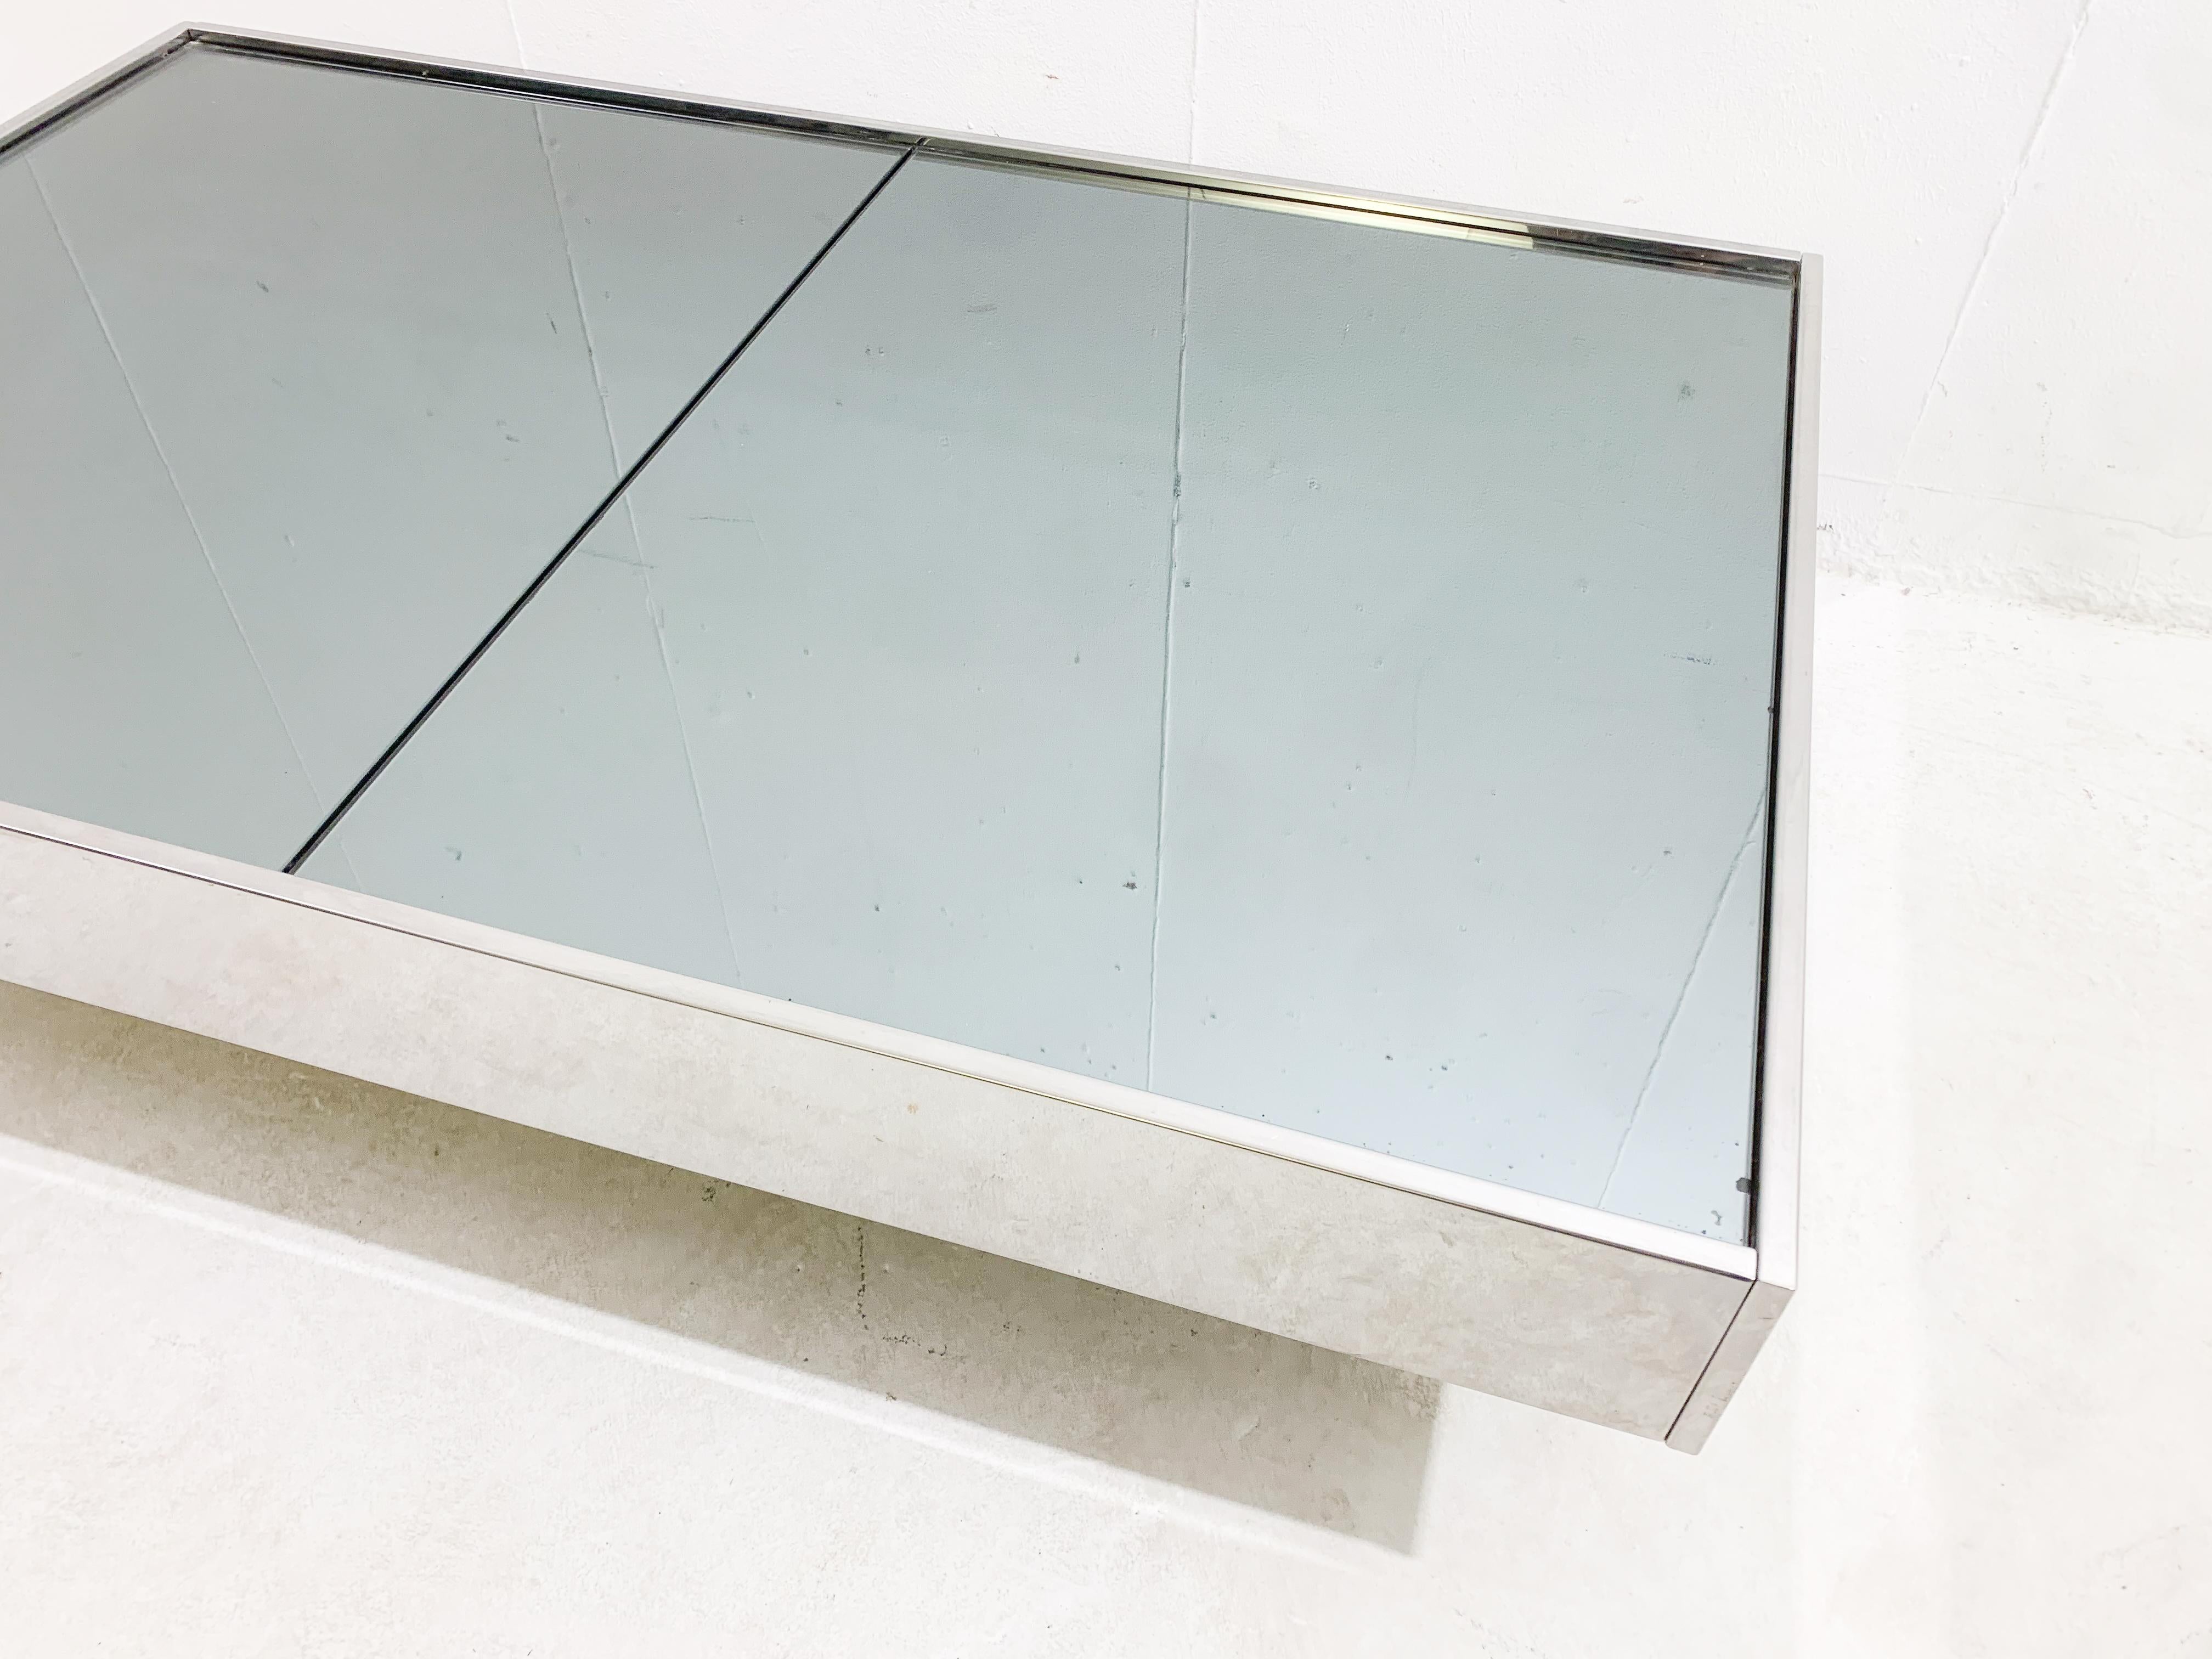 Mid-century chrome and mirror sliding bar coffee table by Willy Rizzo - Italy 1